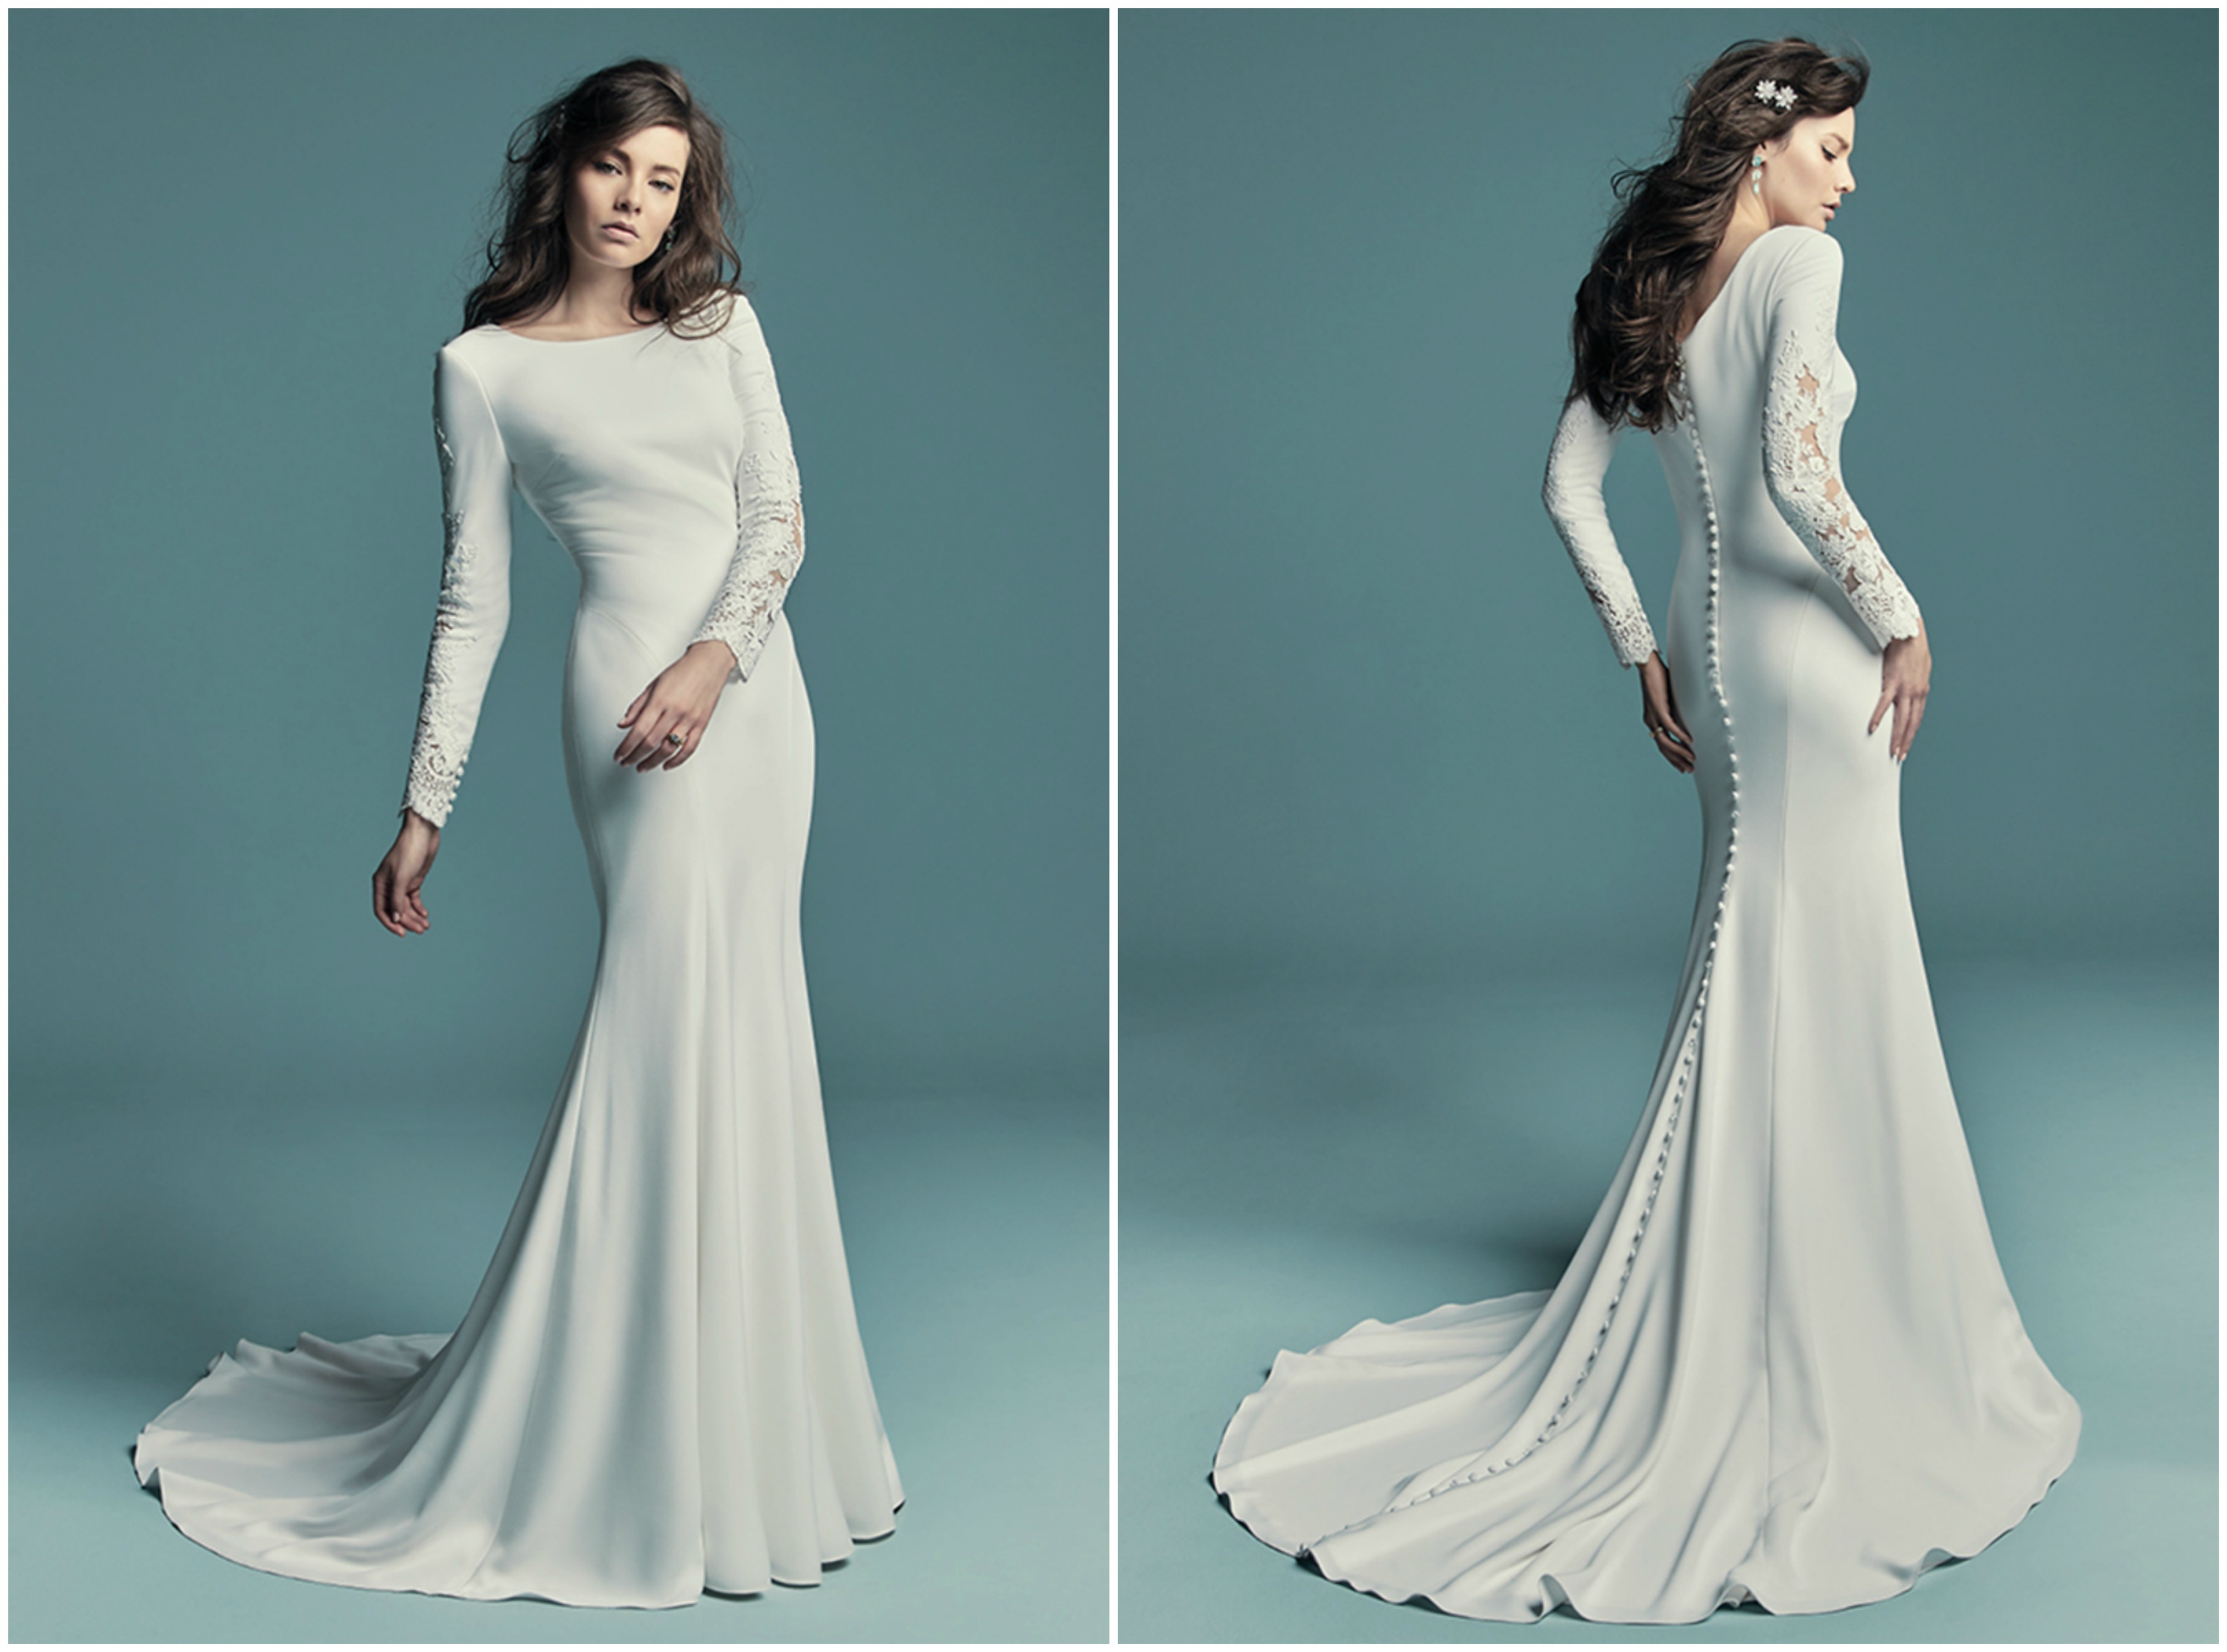 <a href="https://www.maggiesottero.com/maggie-sottero/olyssia/11500" target="_blank">Maggie Sottero</a>